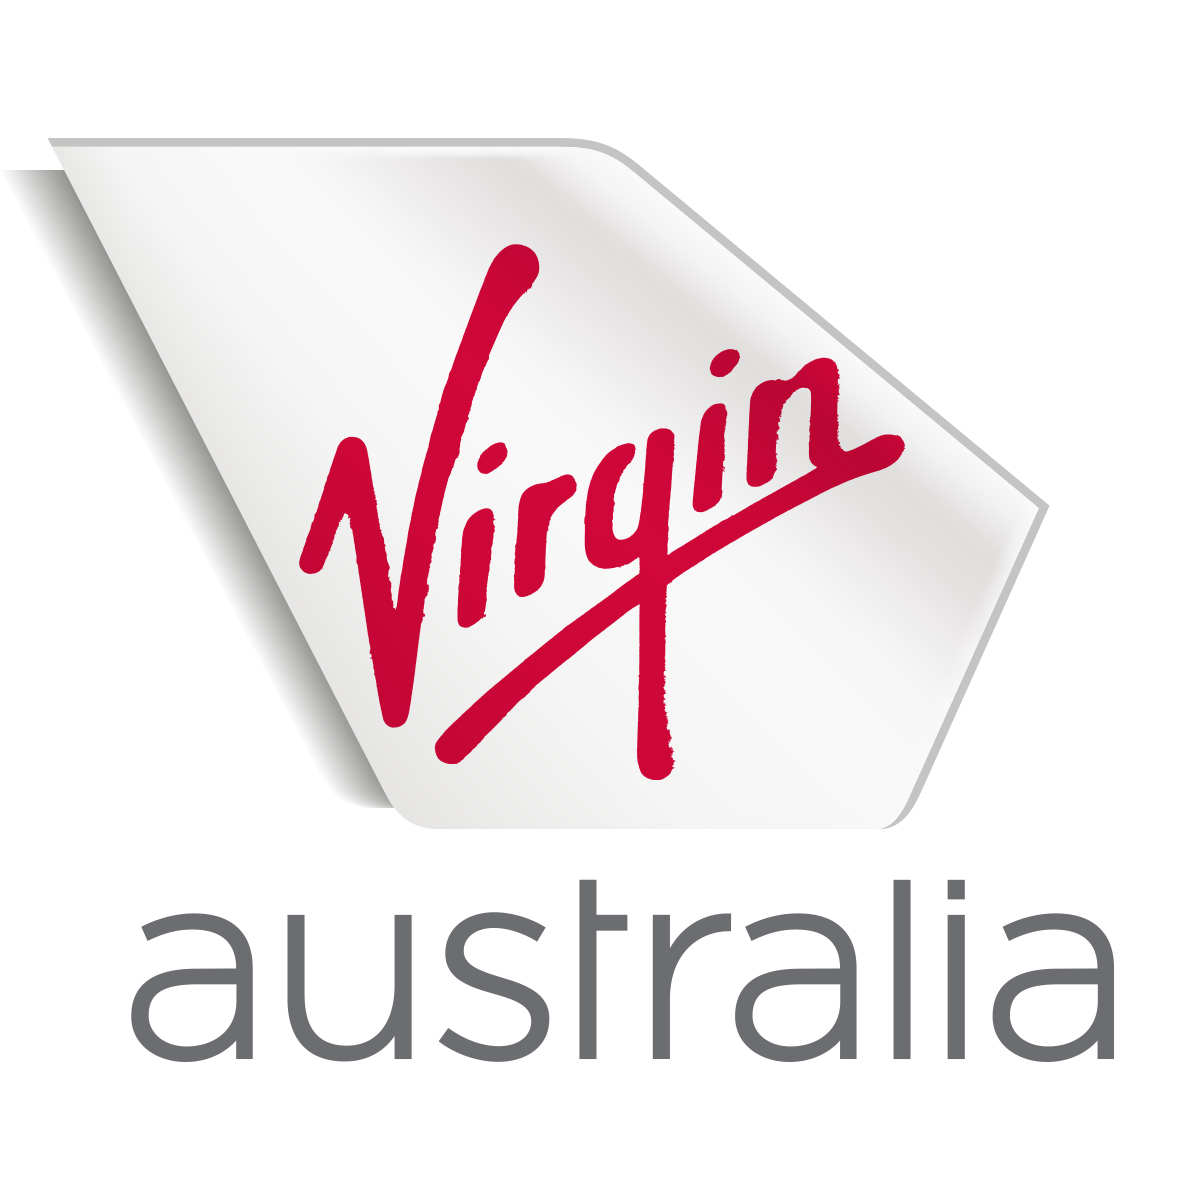 Virgin set to lease more planes